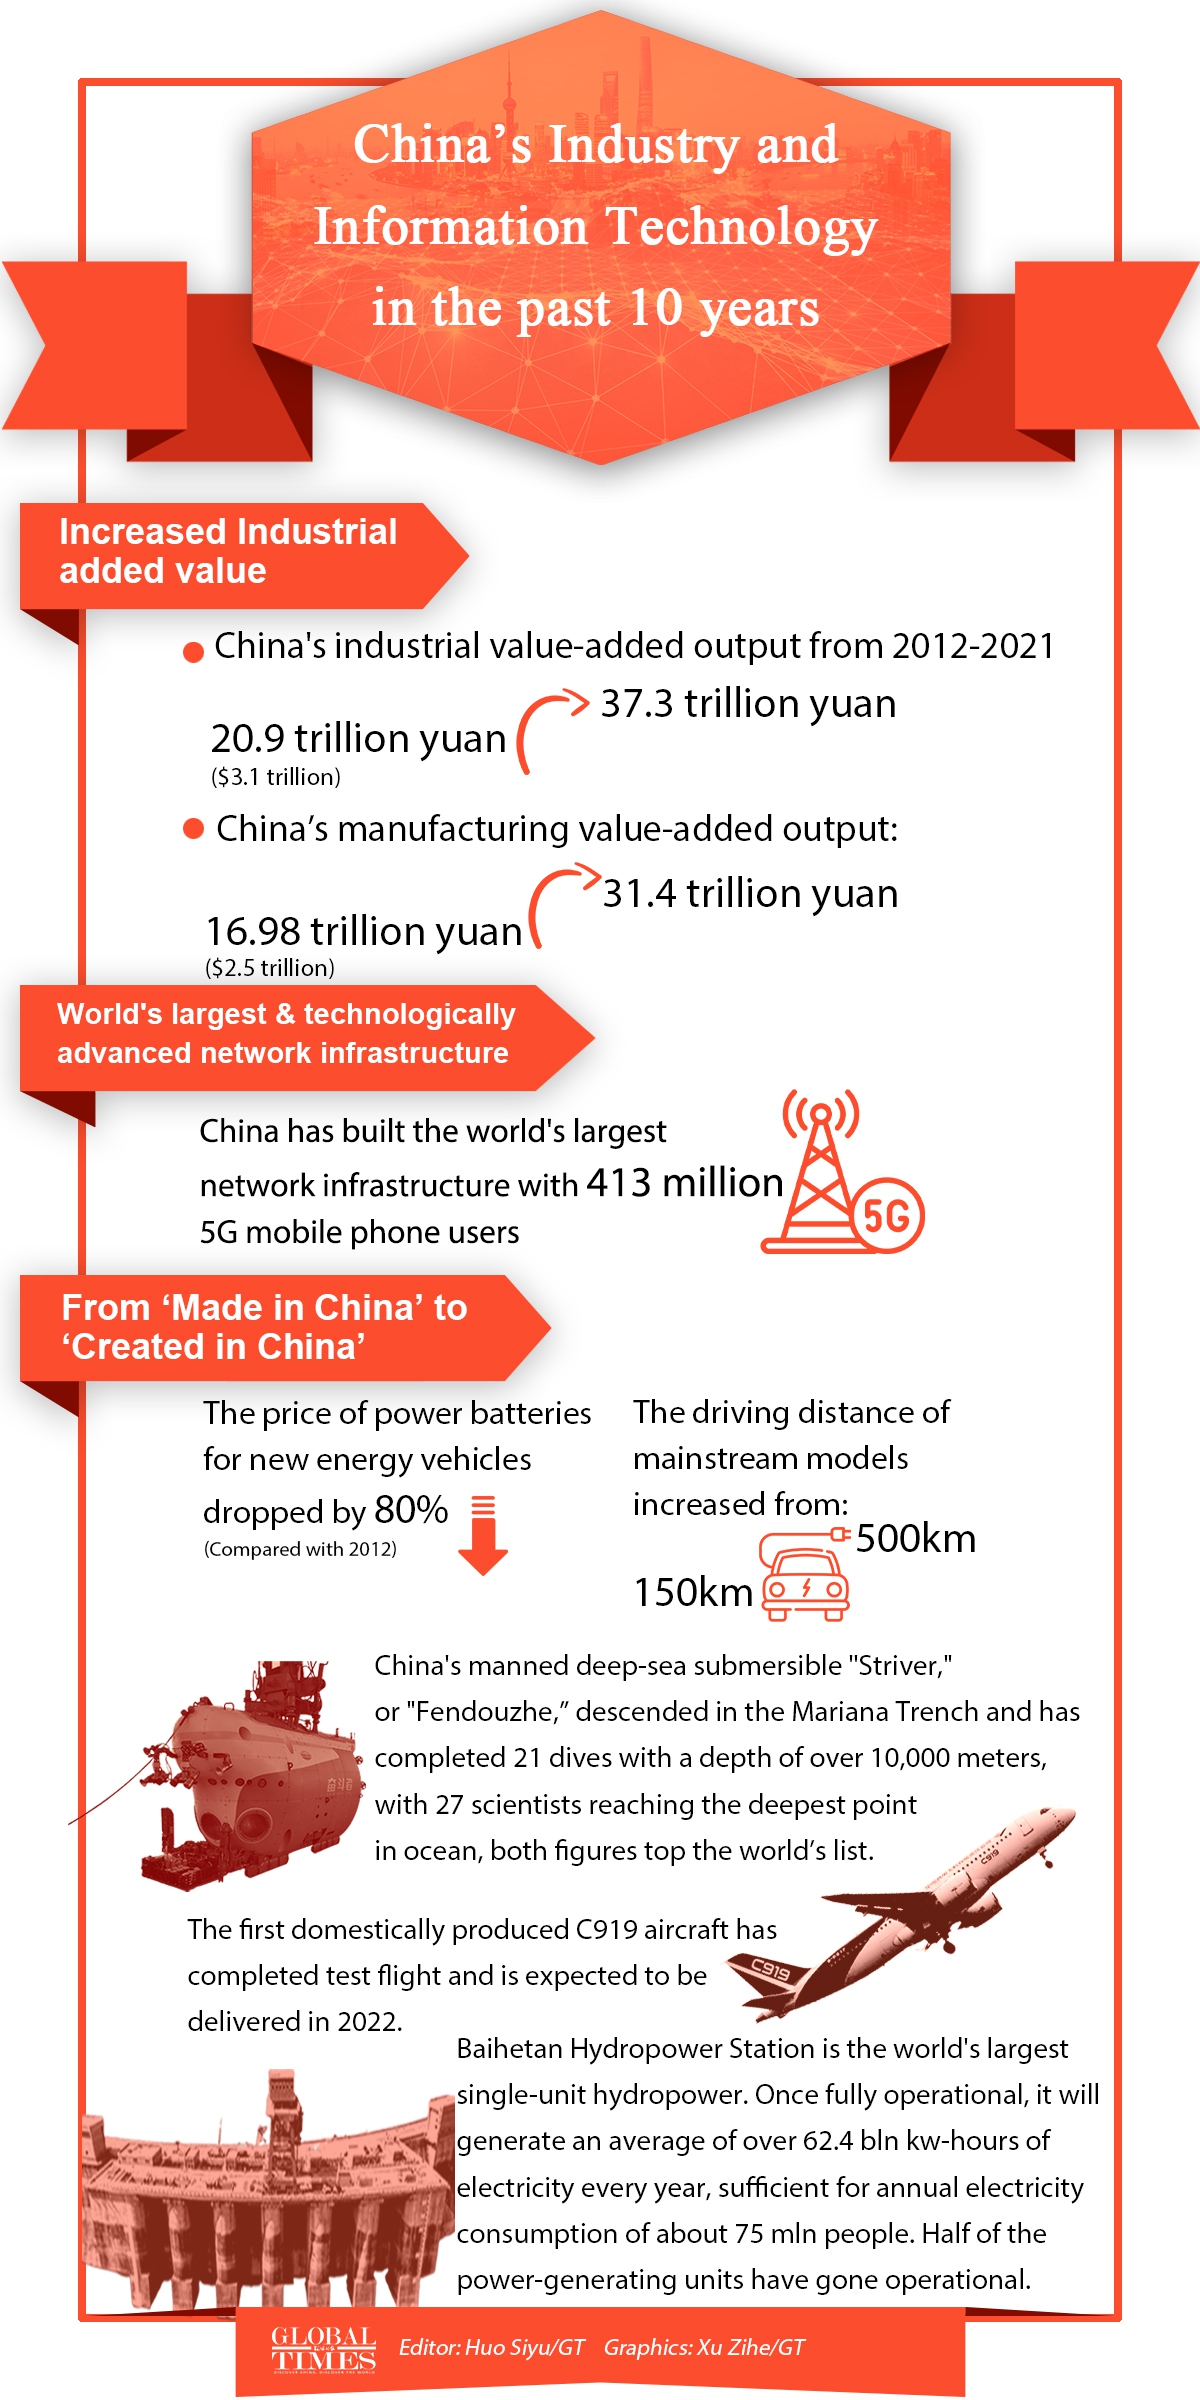 China’s Industry and Information Technology in the past 10 years.Graphic:Huo Siyu/GT